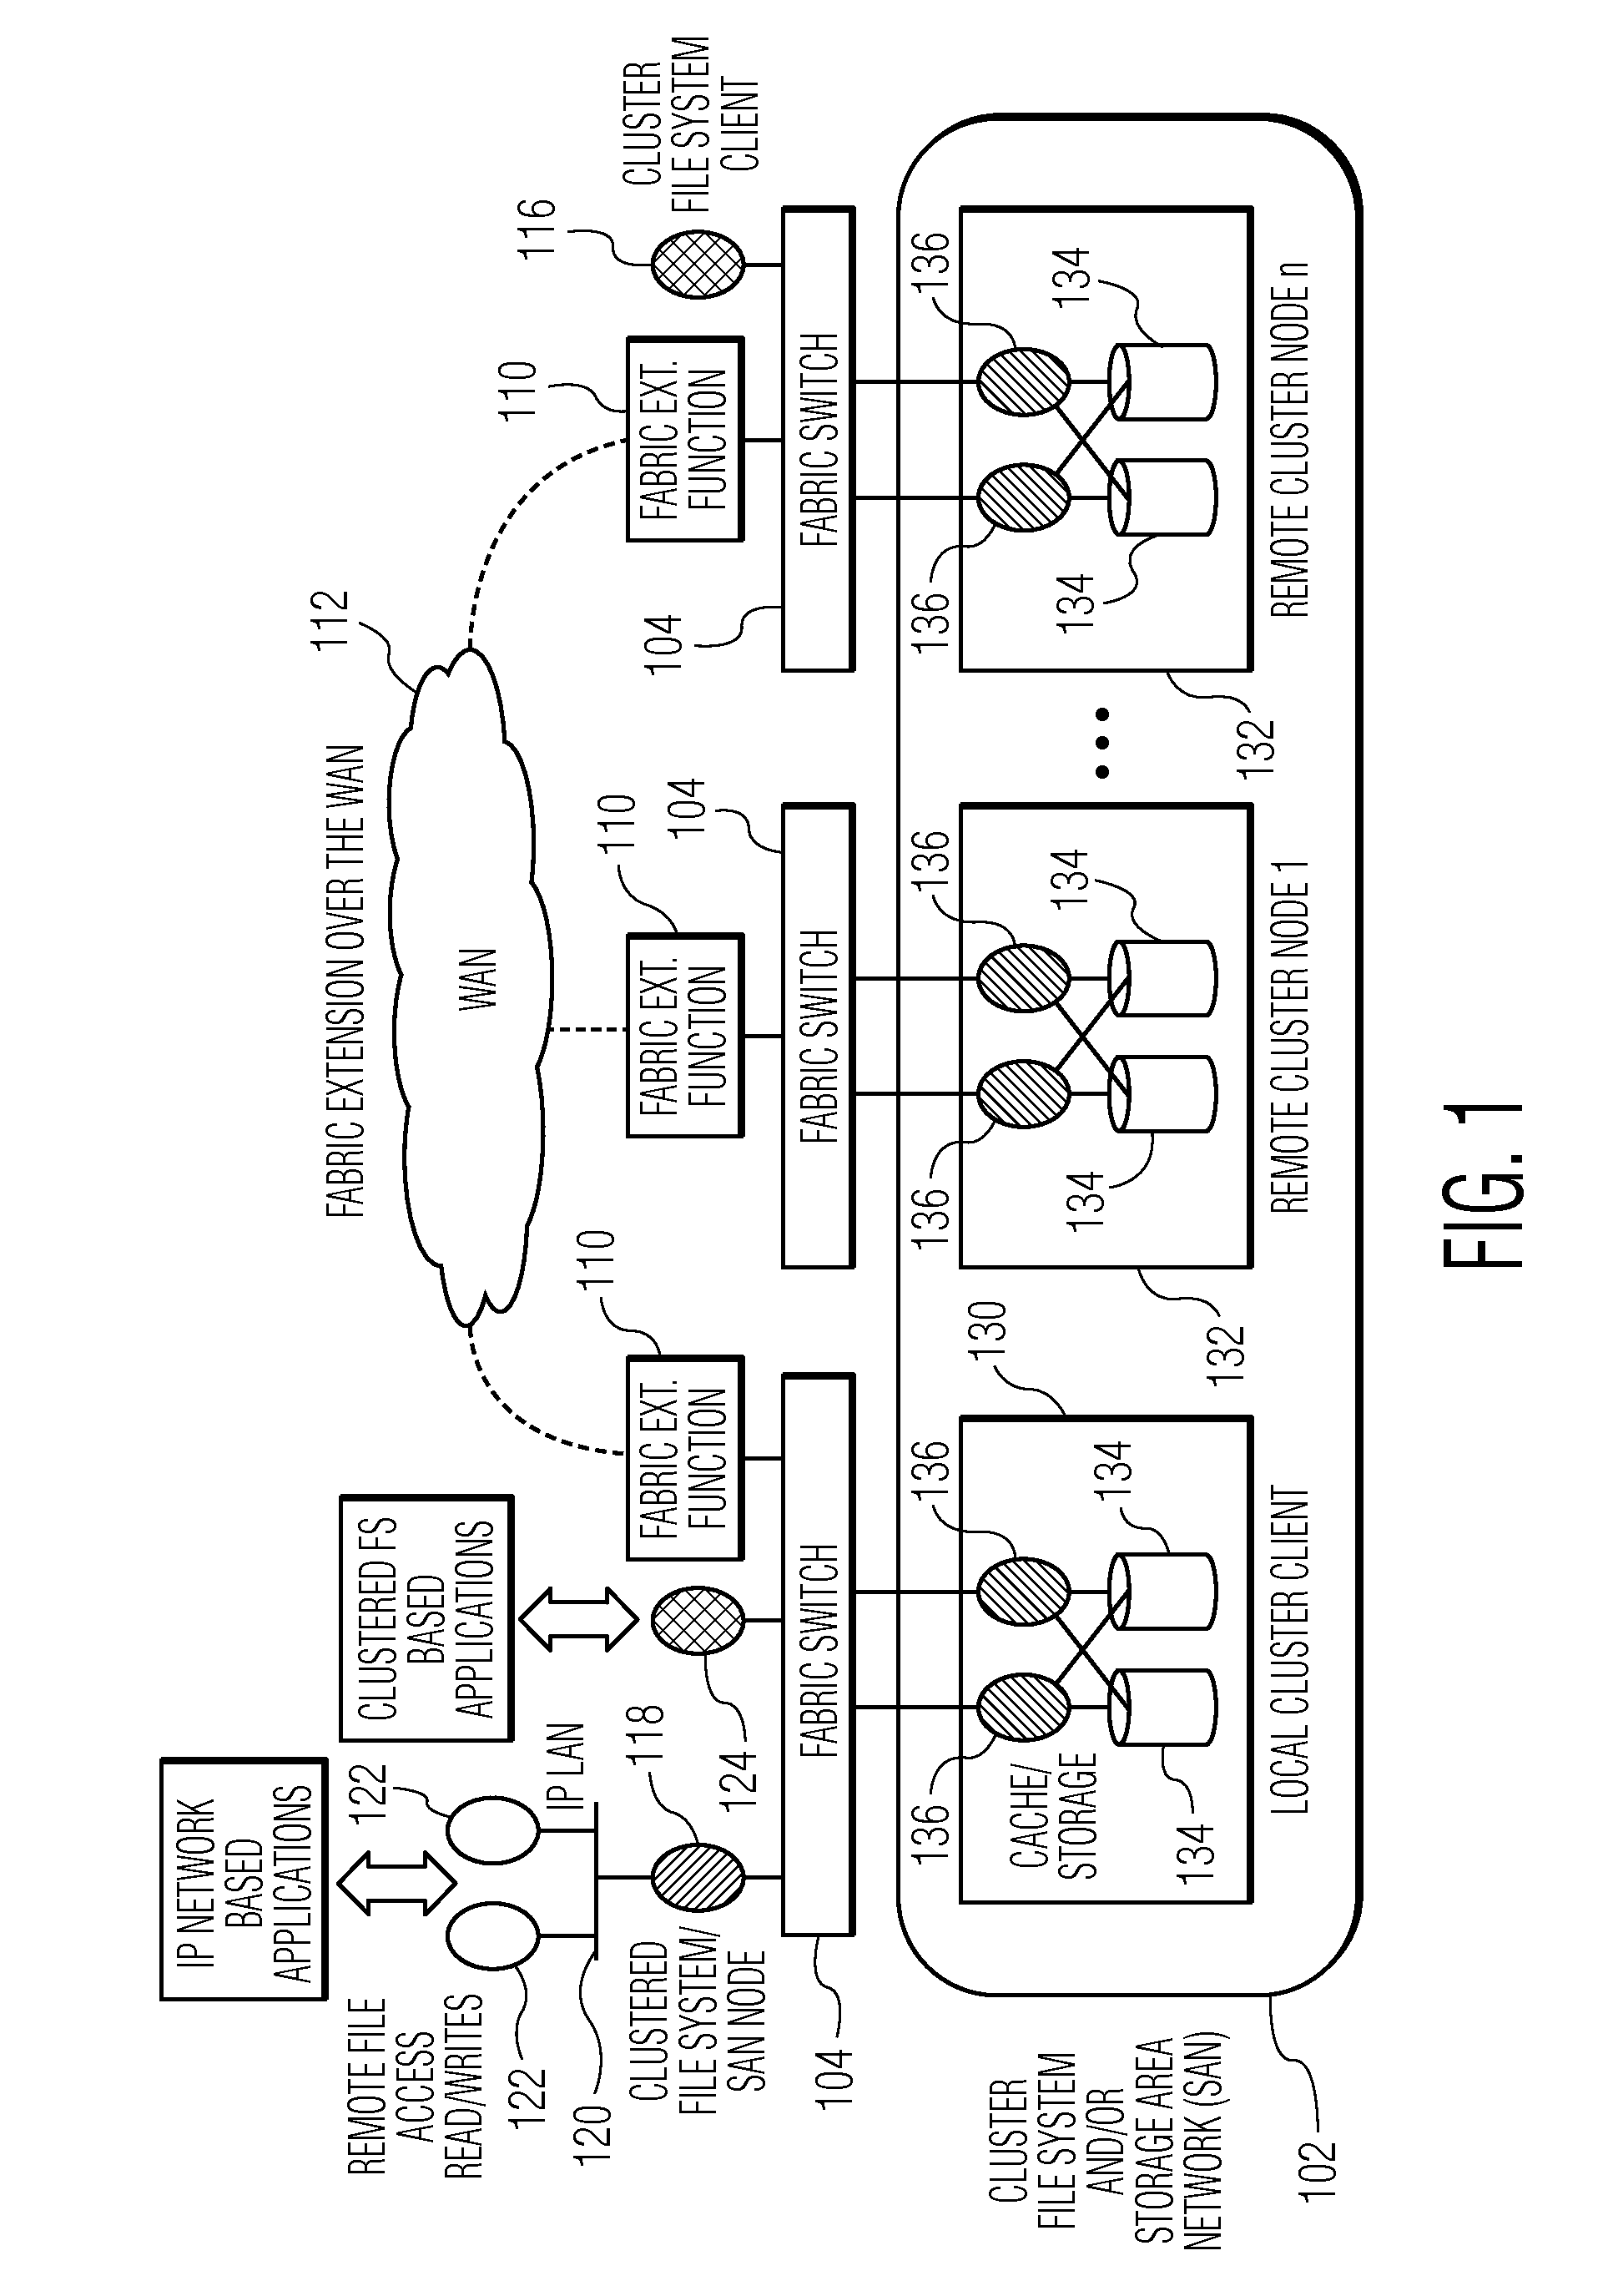 Methods and systems for accessing remote digital data over a wide area network (WAN)